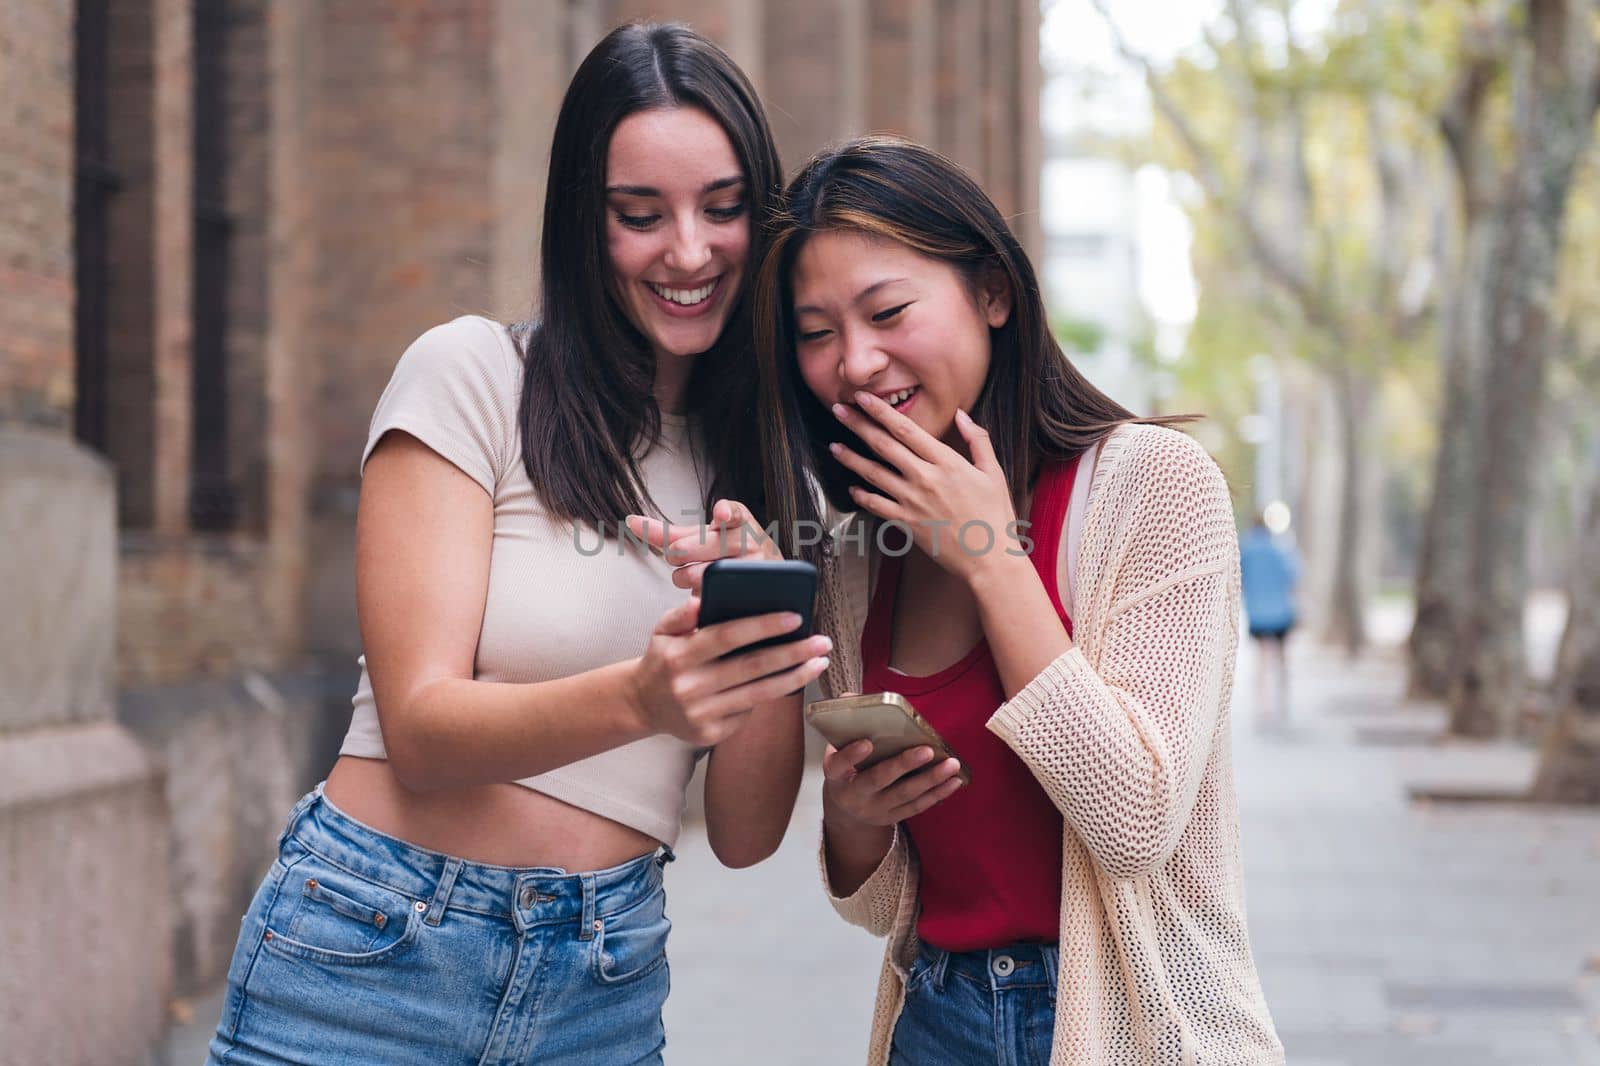 two young women sharing confidences and having fun with their cell phones while walking through the city, concept of friendship and love between people of the same sex